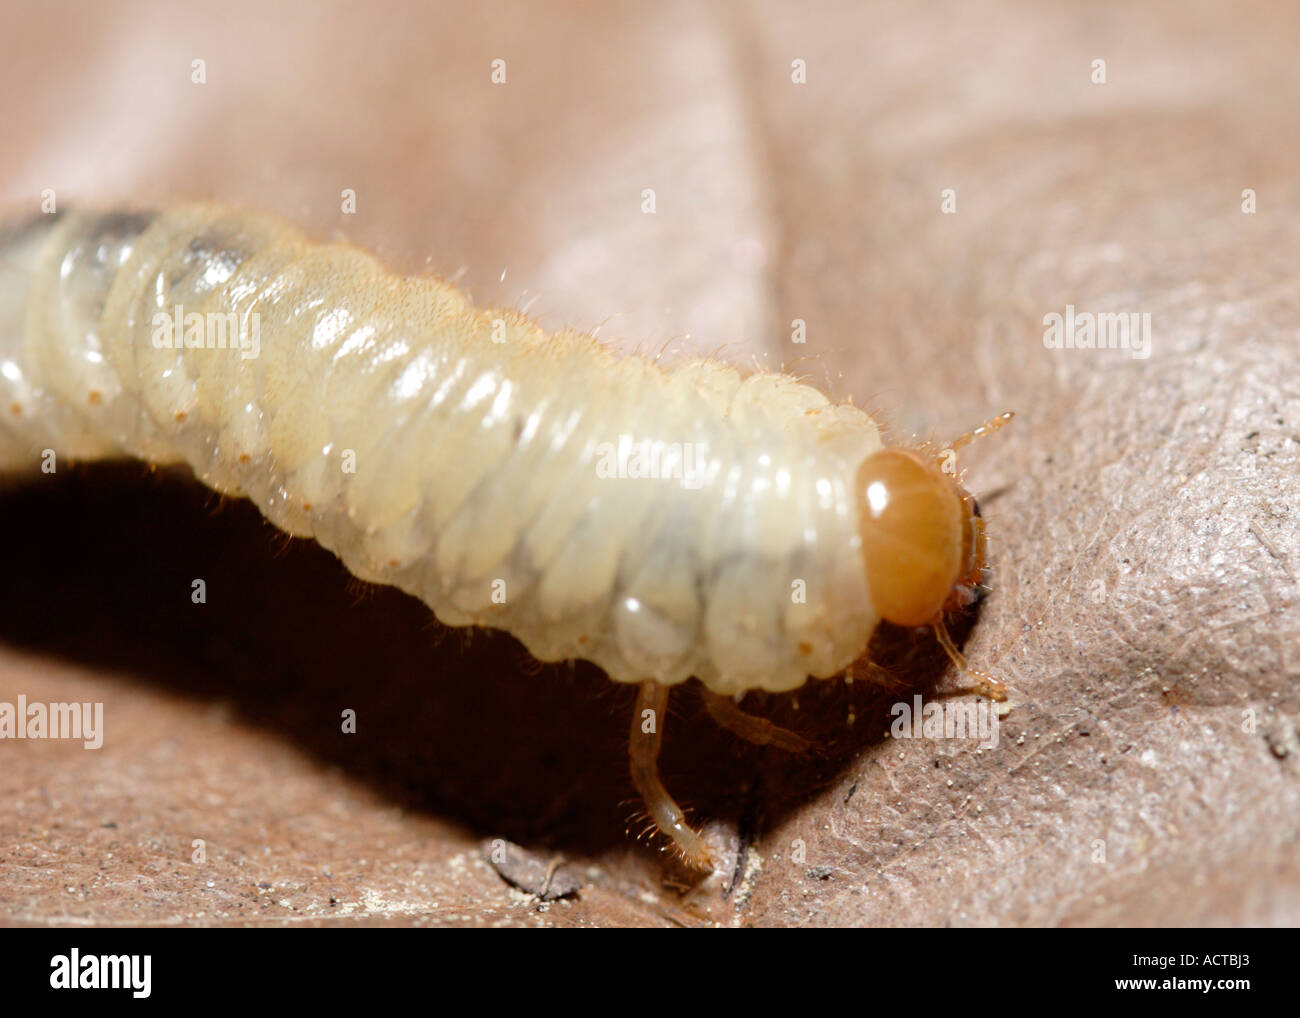 White grub larva of Phyllophaga crinita, also known as a May beetle or June beetle Stock Photo